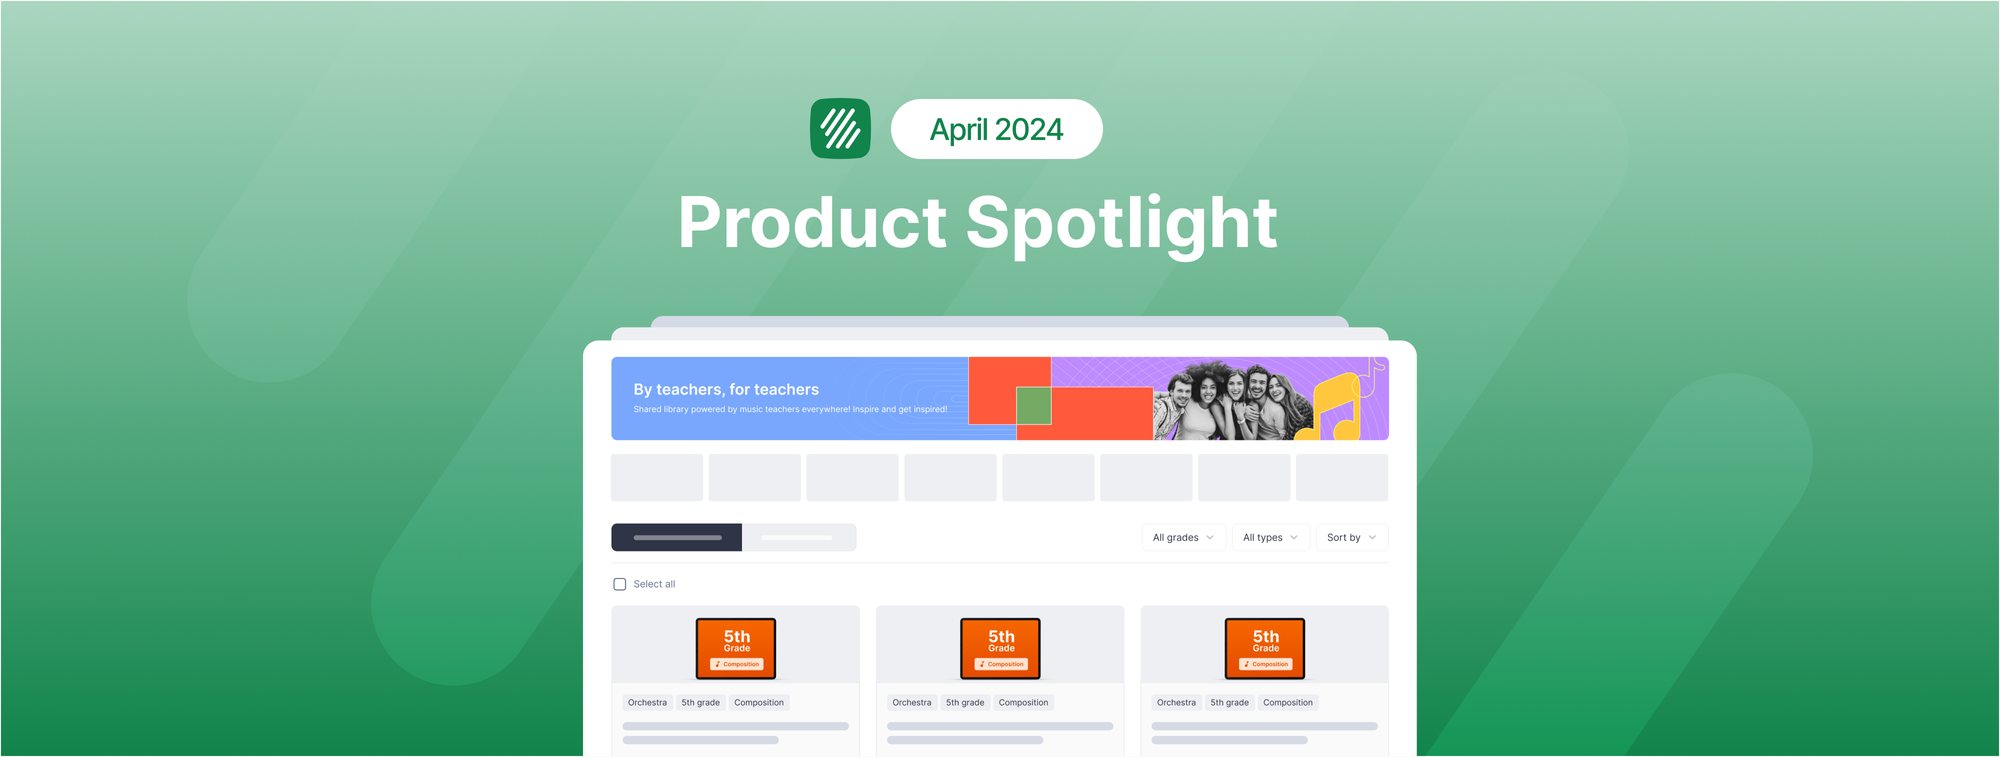 Latest Updates, April 2024: Music Snippet for Microsoft Word & PowerPoint and major upcoming enhancements